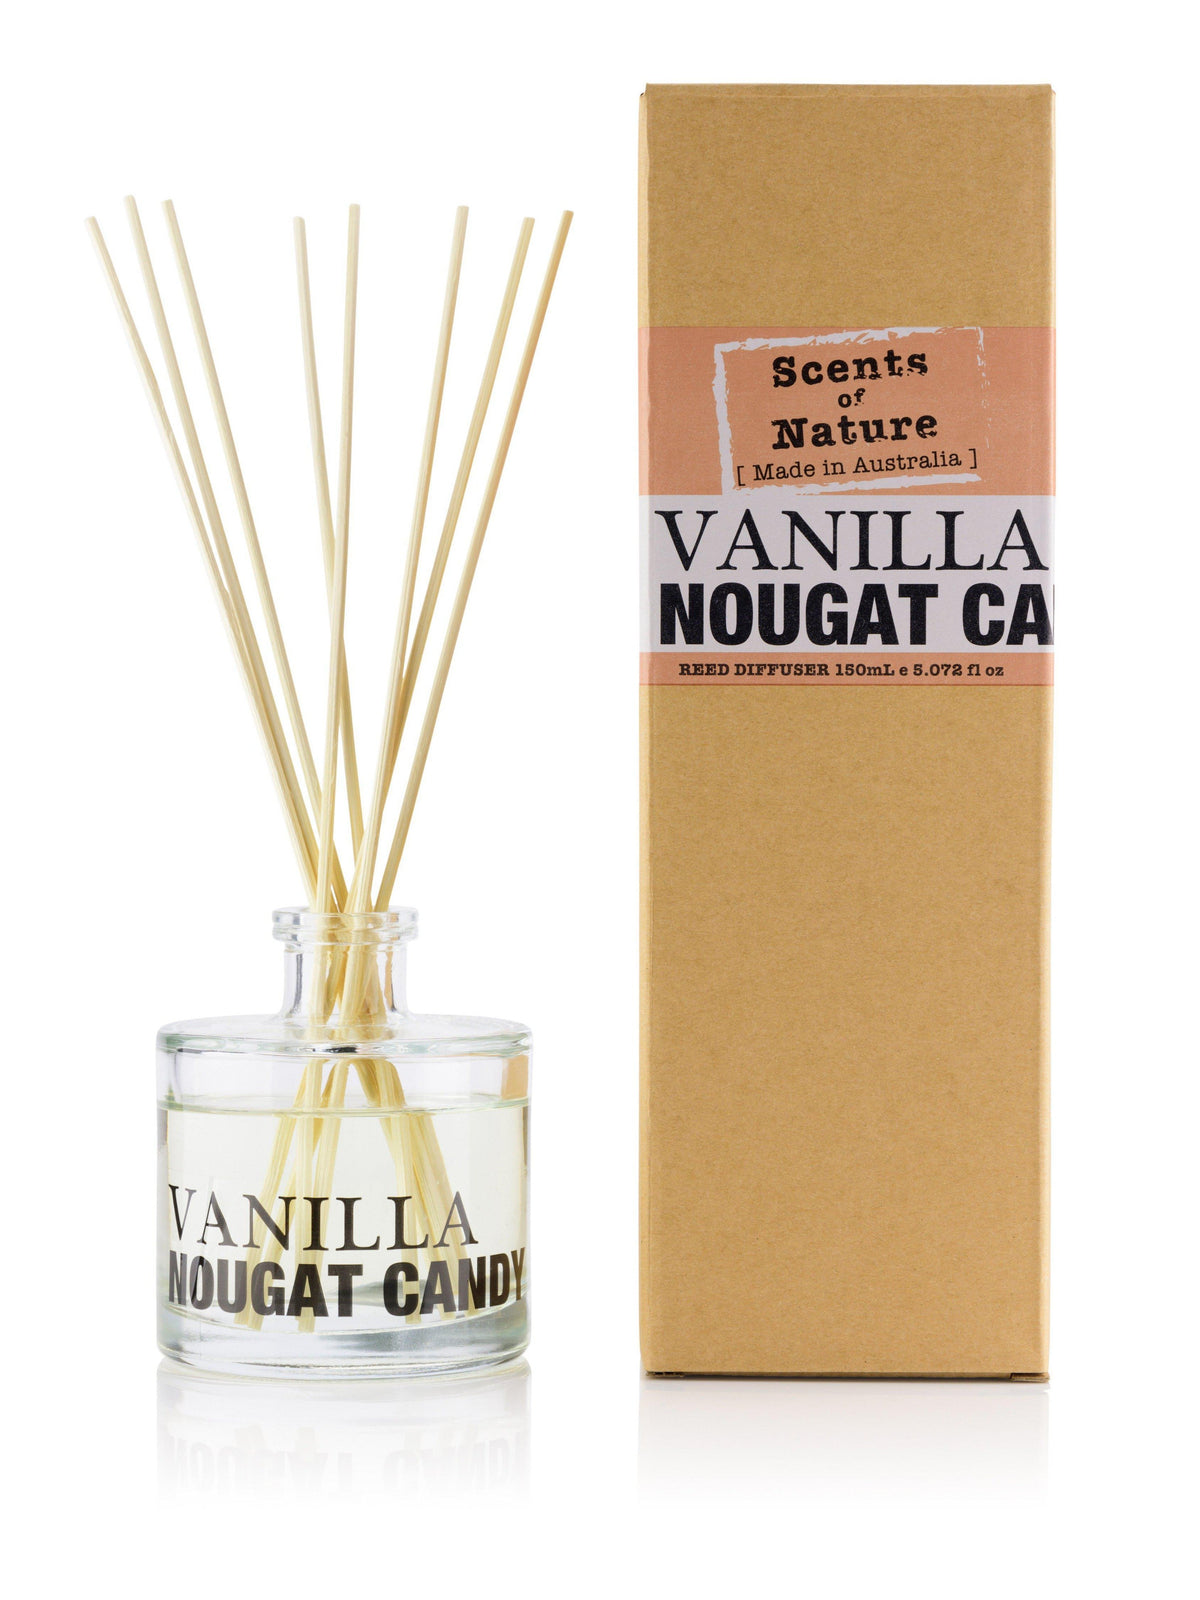 Scents of Nature by Tilley Reed Diffuser (150ml) - Vanilla Nougat Candy